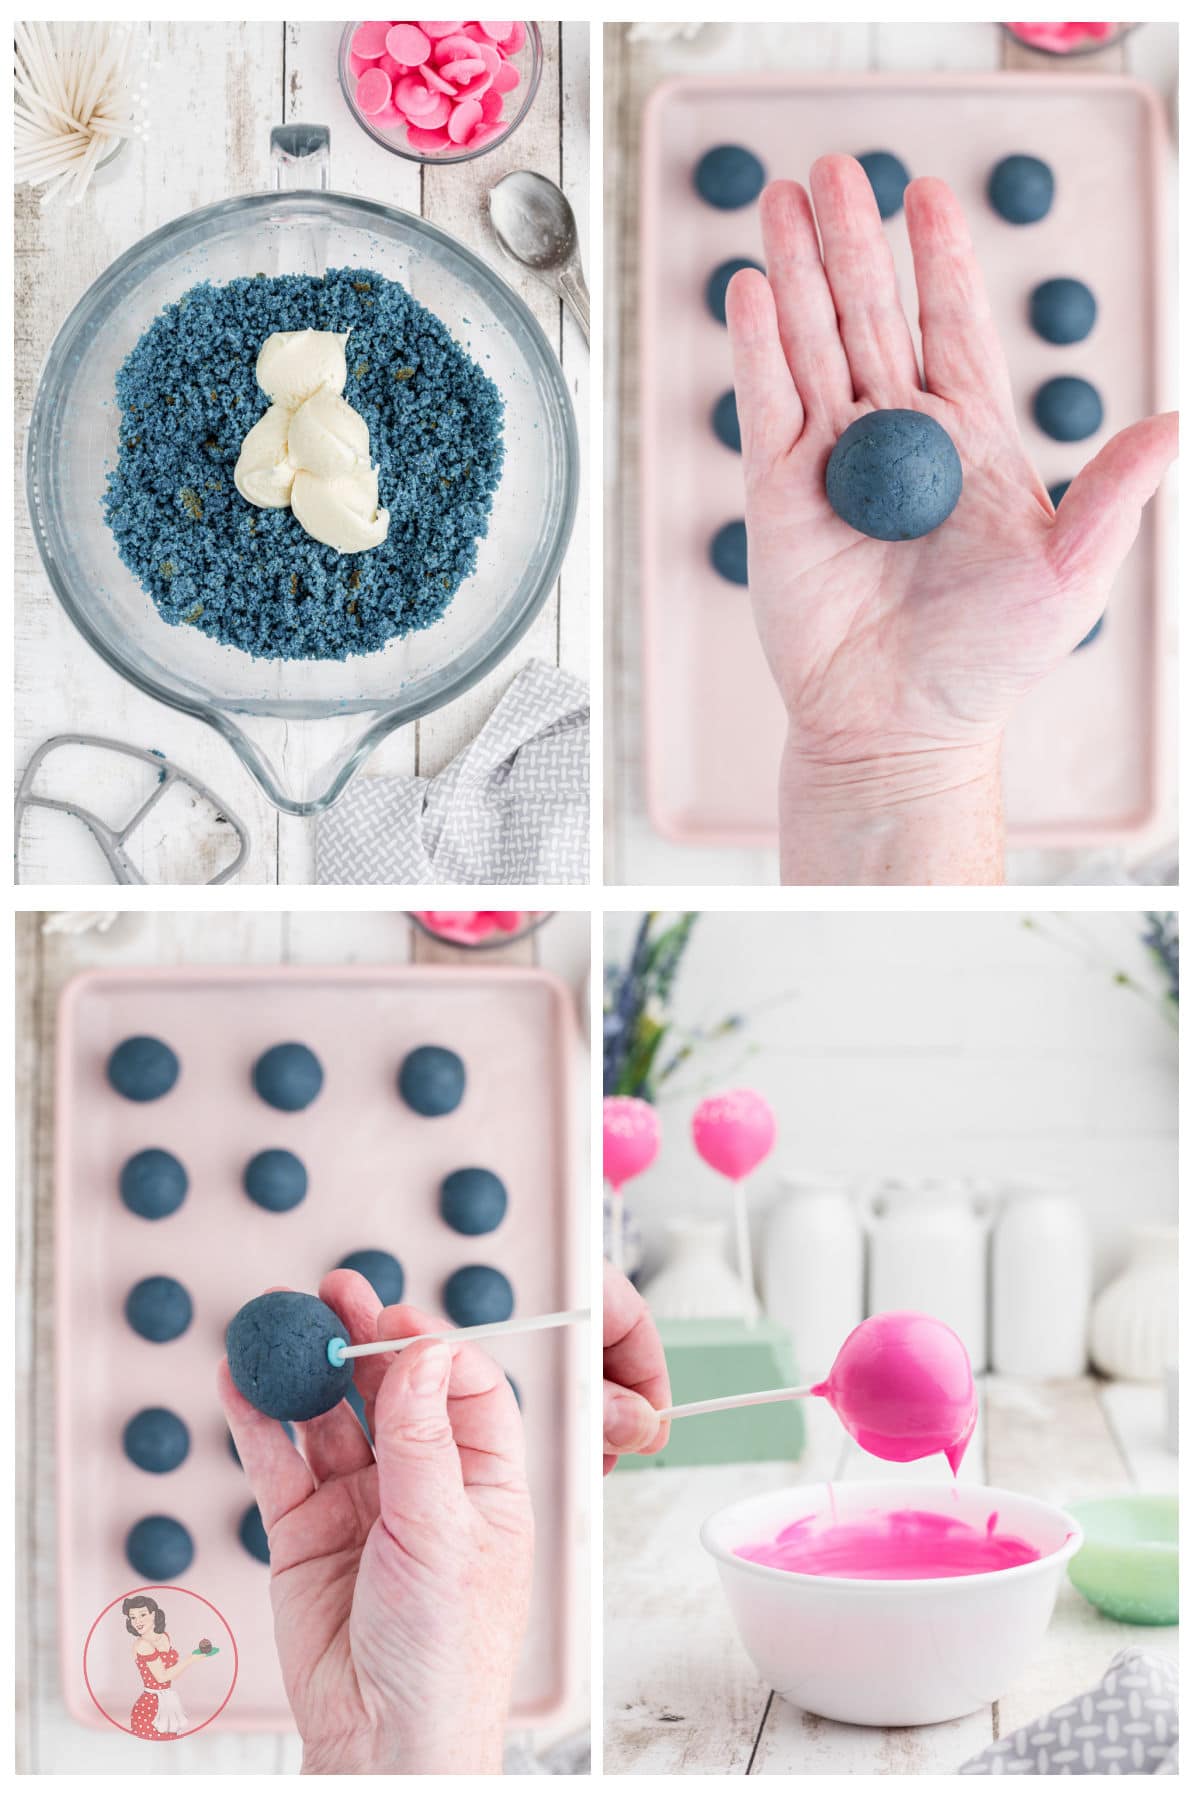 Image collage showing the steps for making perfect cake pops.